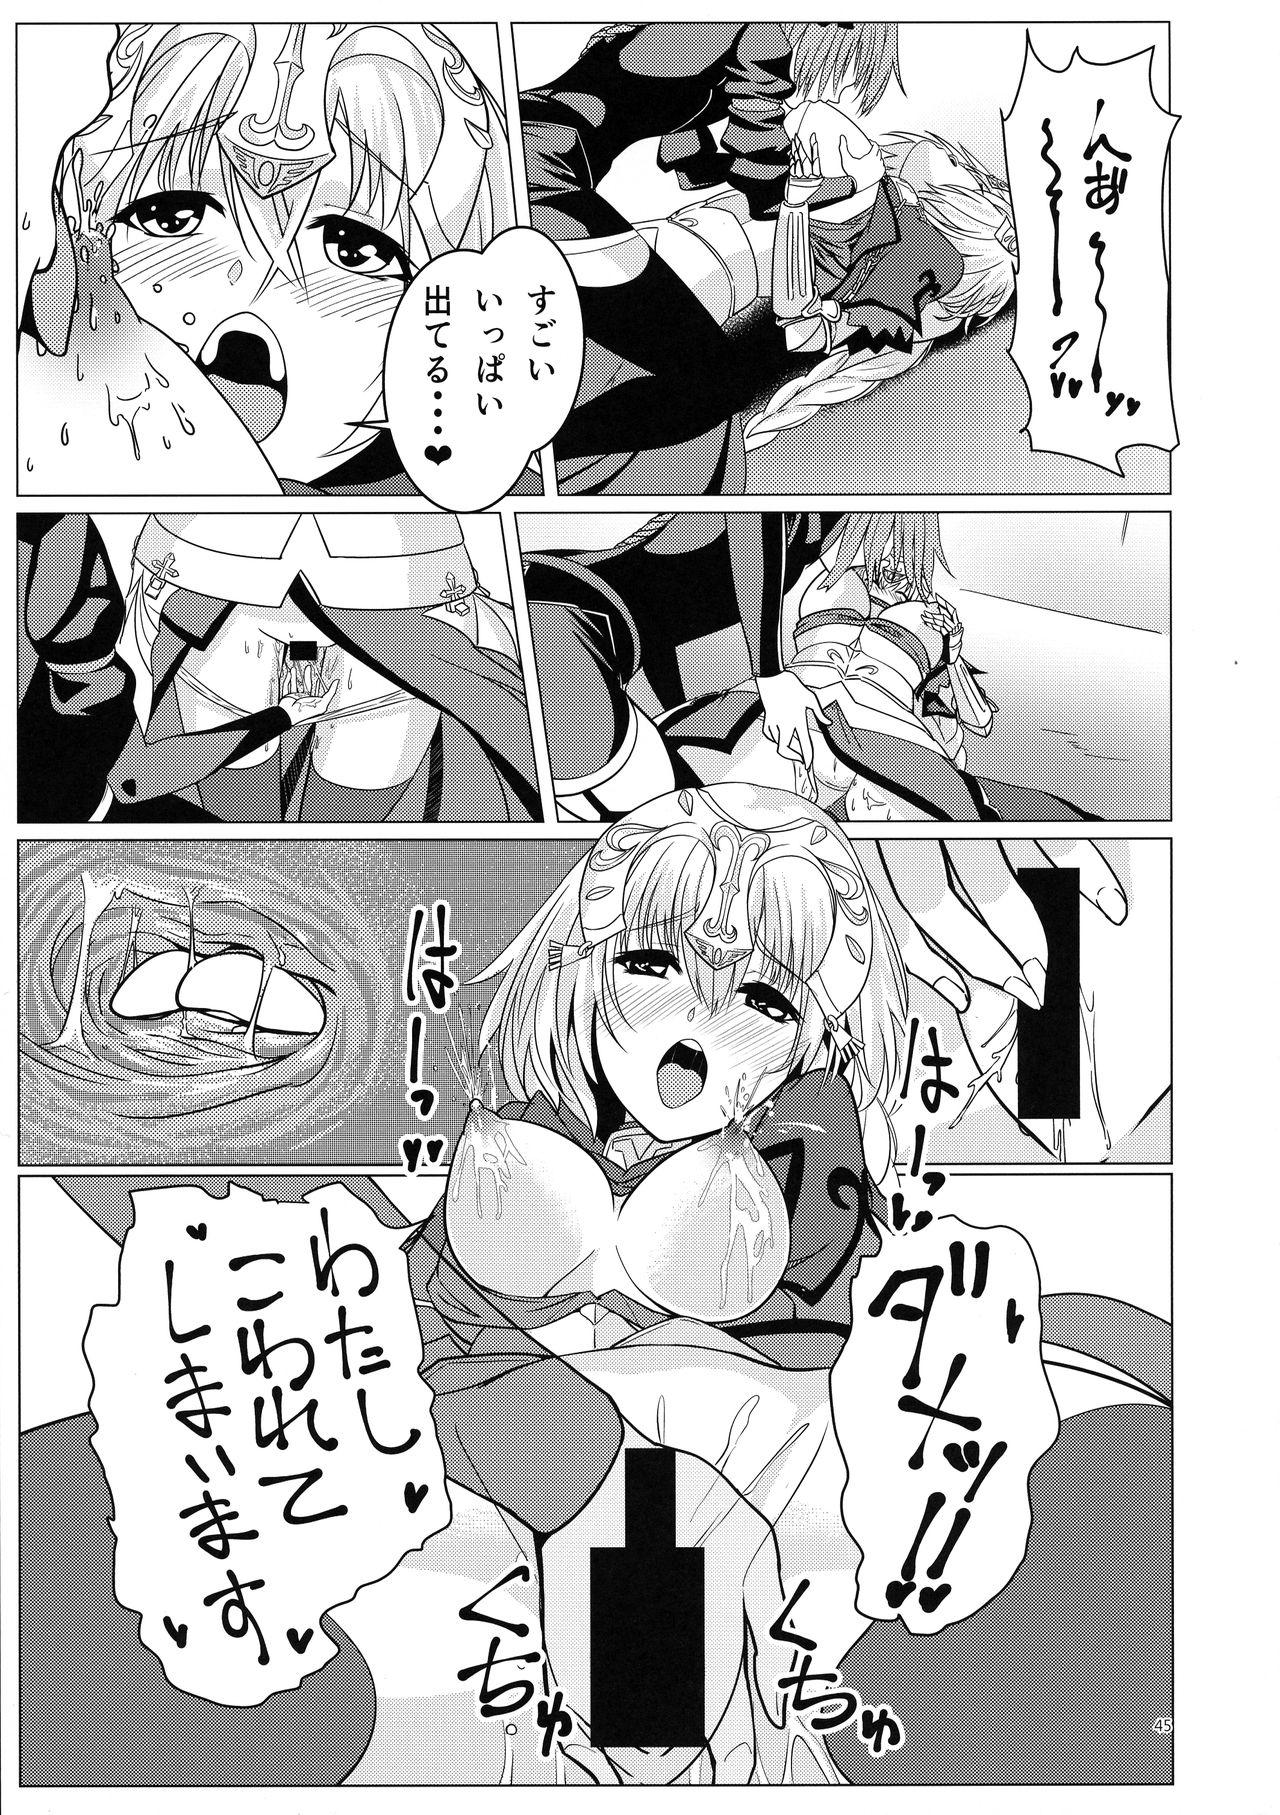 Matching Spirits - Jeanne and Astolfo have sex 41